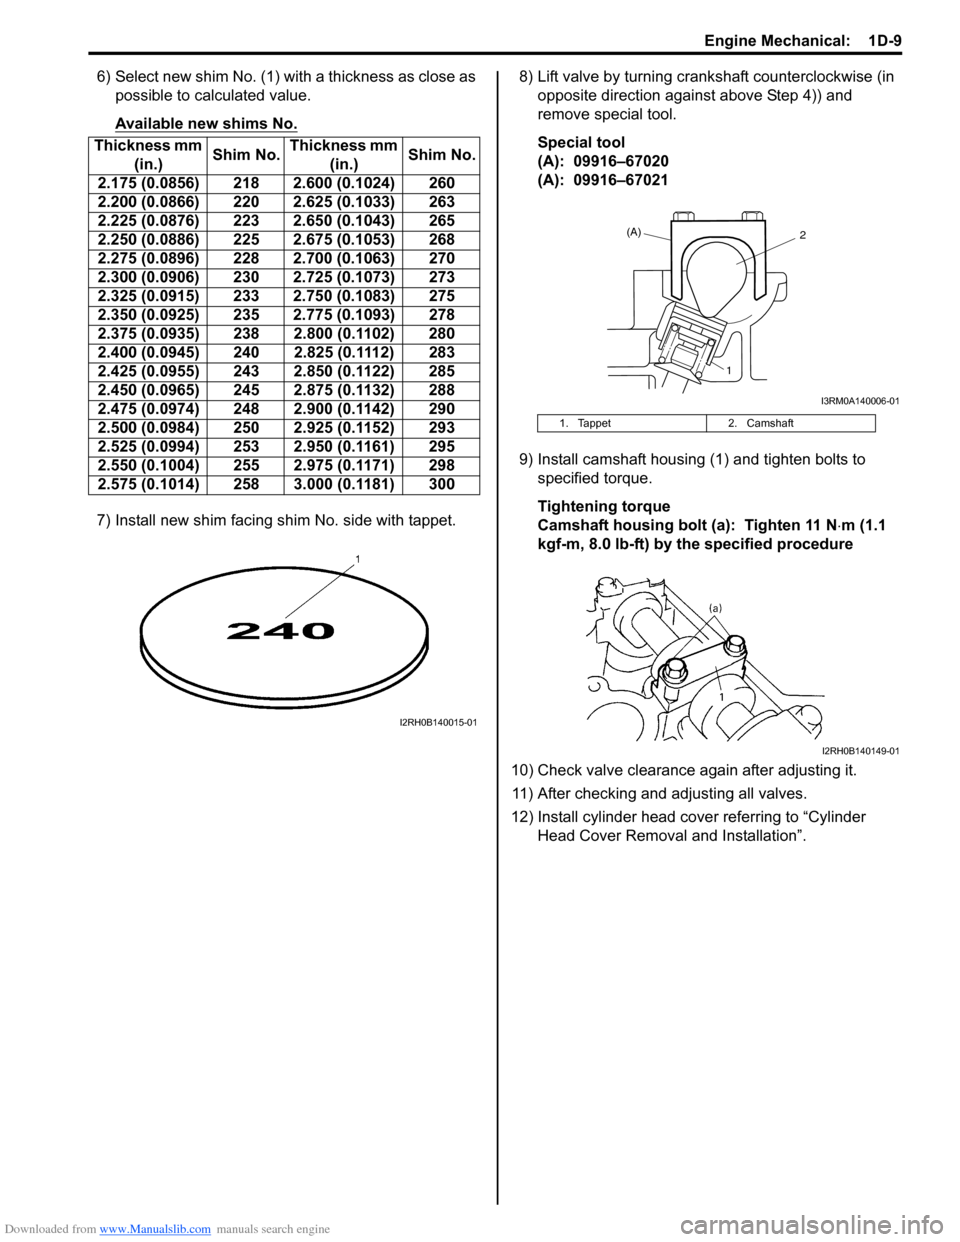 SUZUKI SX4 2006 1.G Service Workshop Manual Downloaded from www.Manualslib.com manuals search engine Engine Mechanical:  1D-9
6) Select new shim No. (1) with a thickness as close as 
possible to calculated value.
Available new shims No.
7) Inst